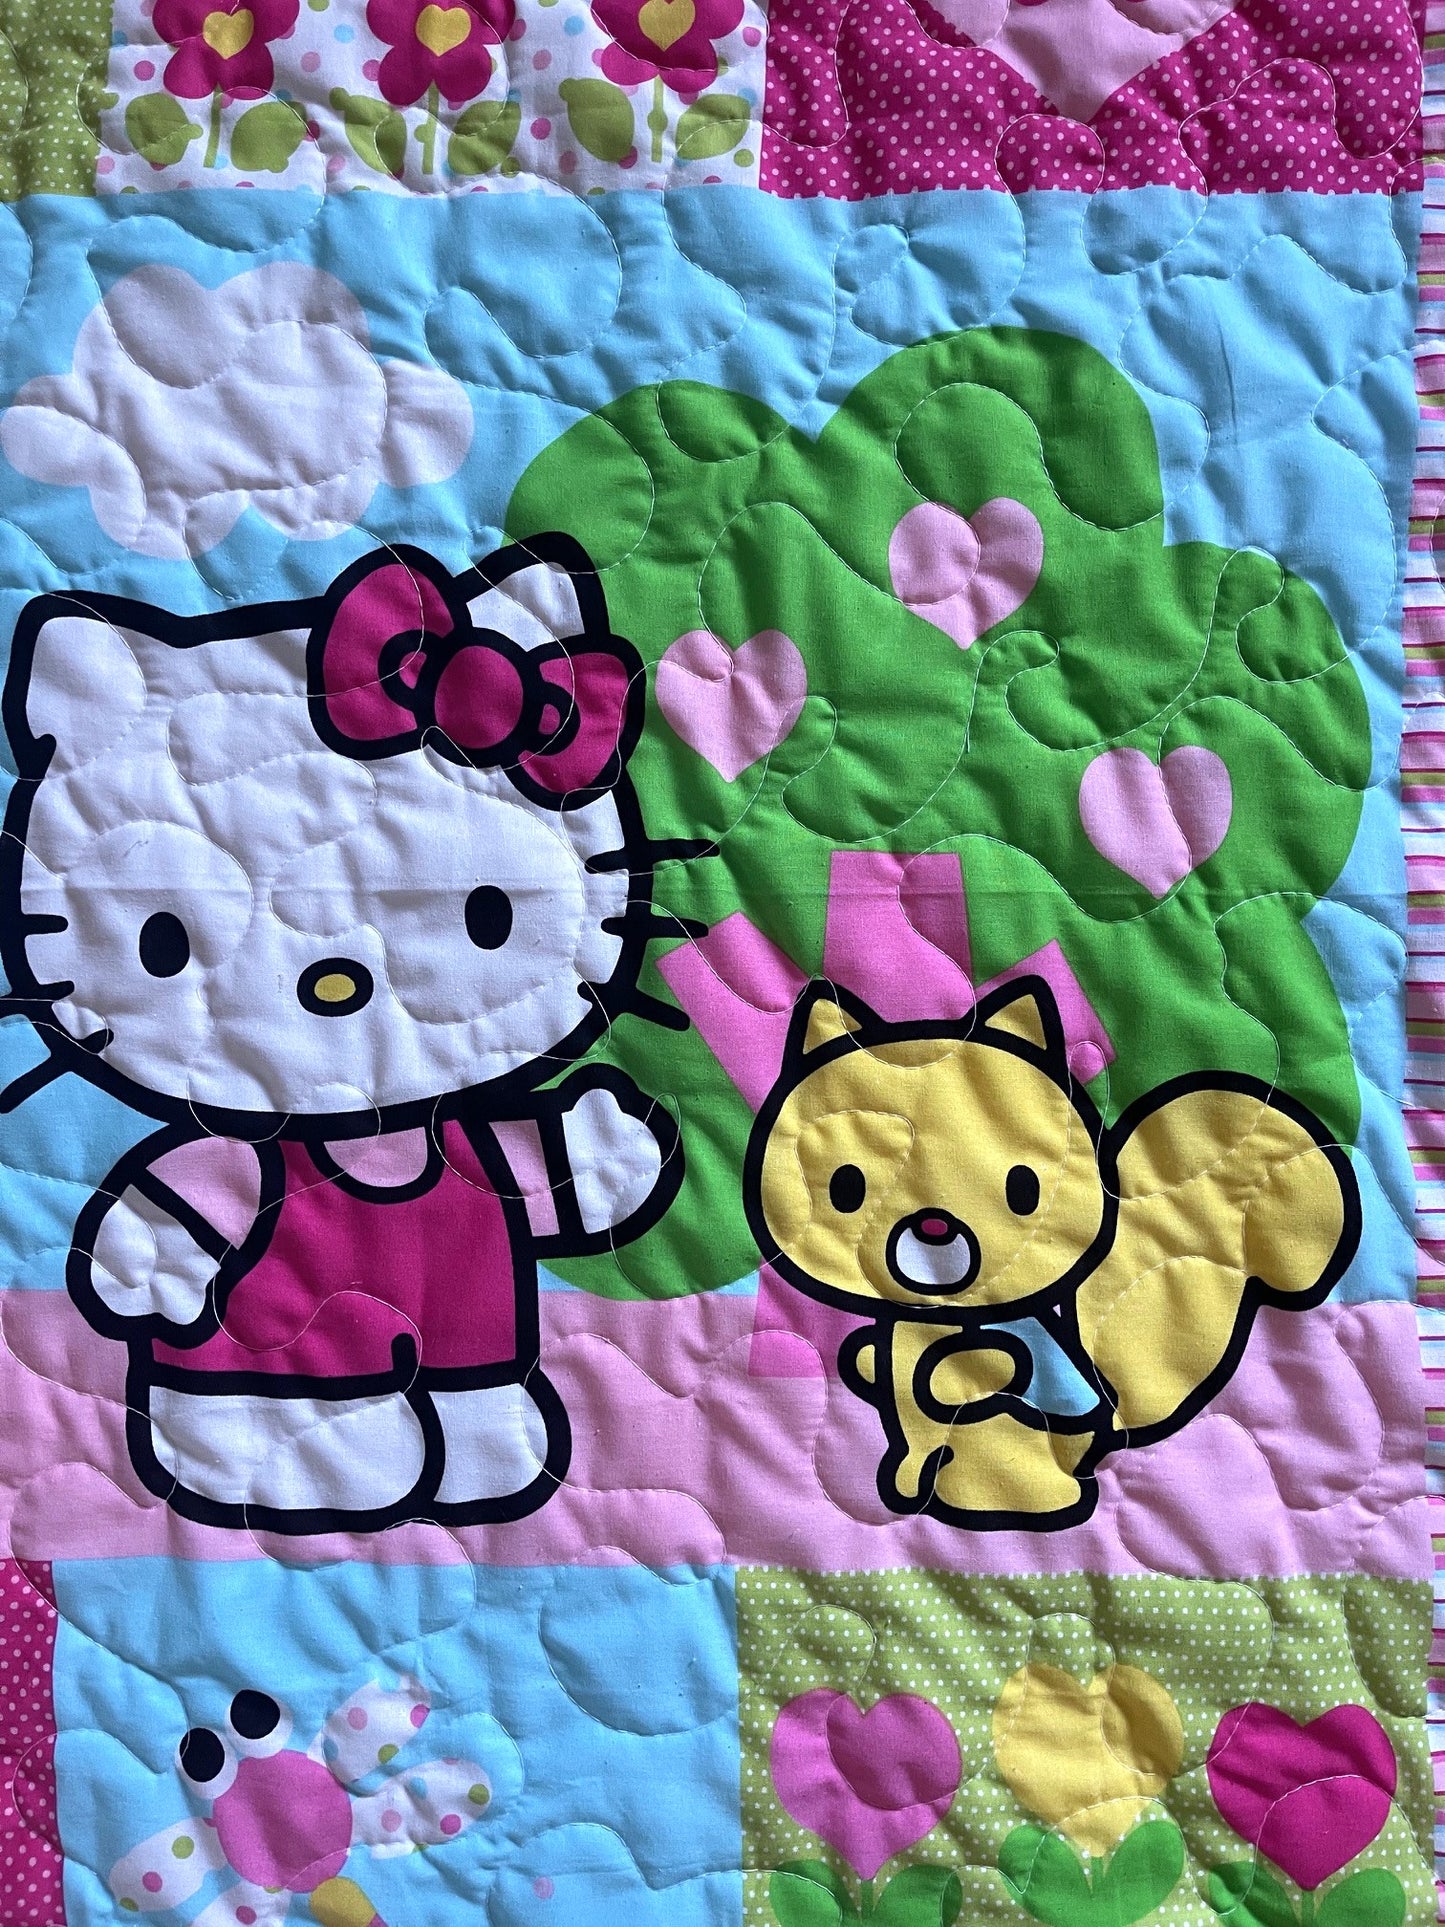 HELLO KITTY & LORRY SQUIRREL GARDEN FLOWERS INSPIRED QUILTED BLANKET